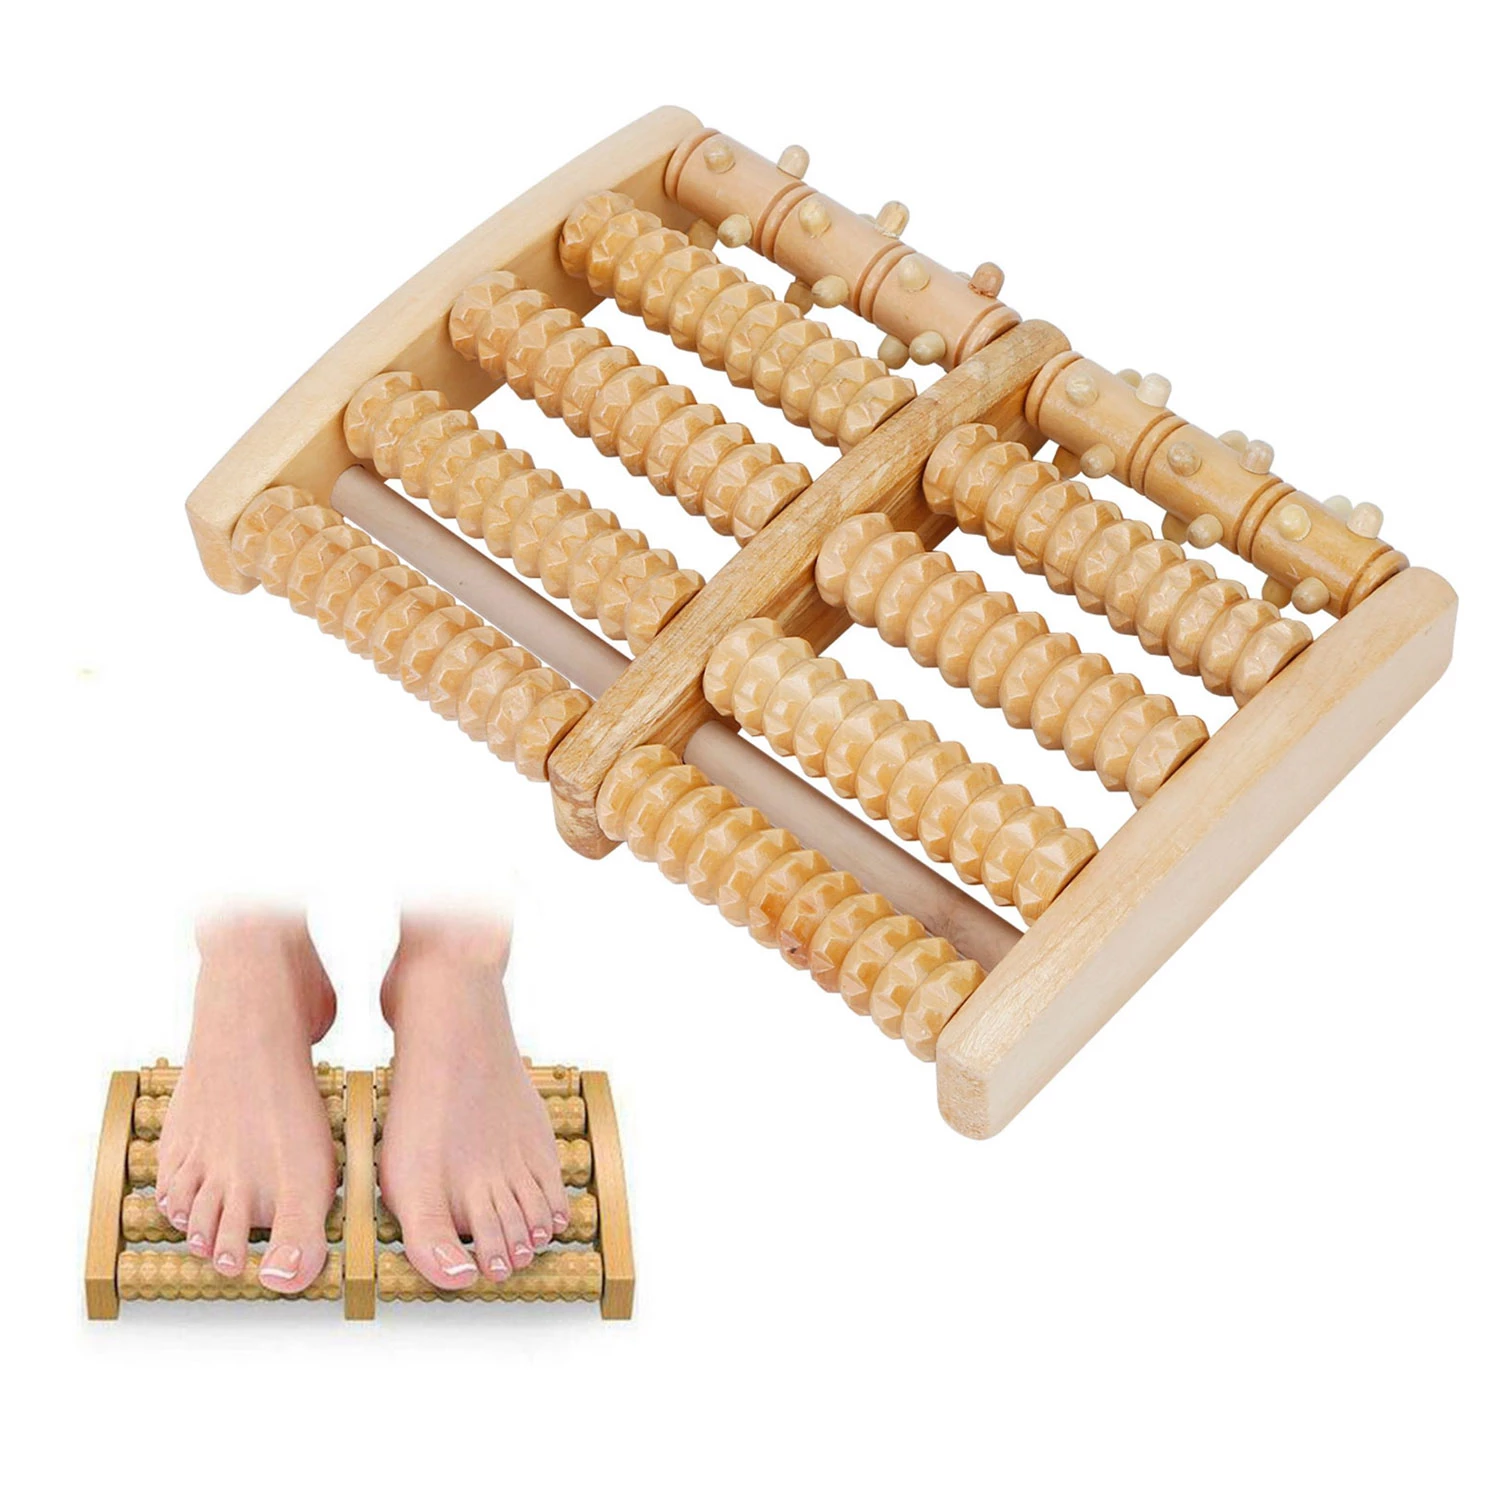 Dual Wooden Foot Roller - Stress Relief And Acupressure Massage for Foot, Leg, And Back